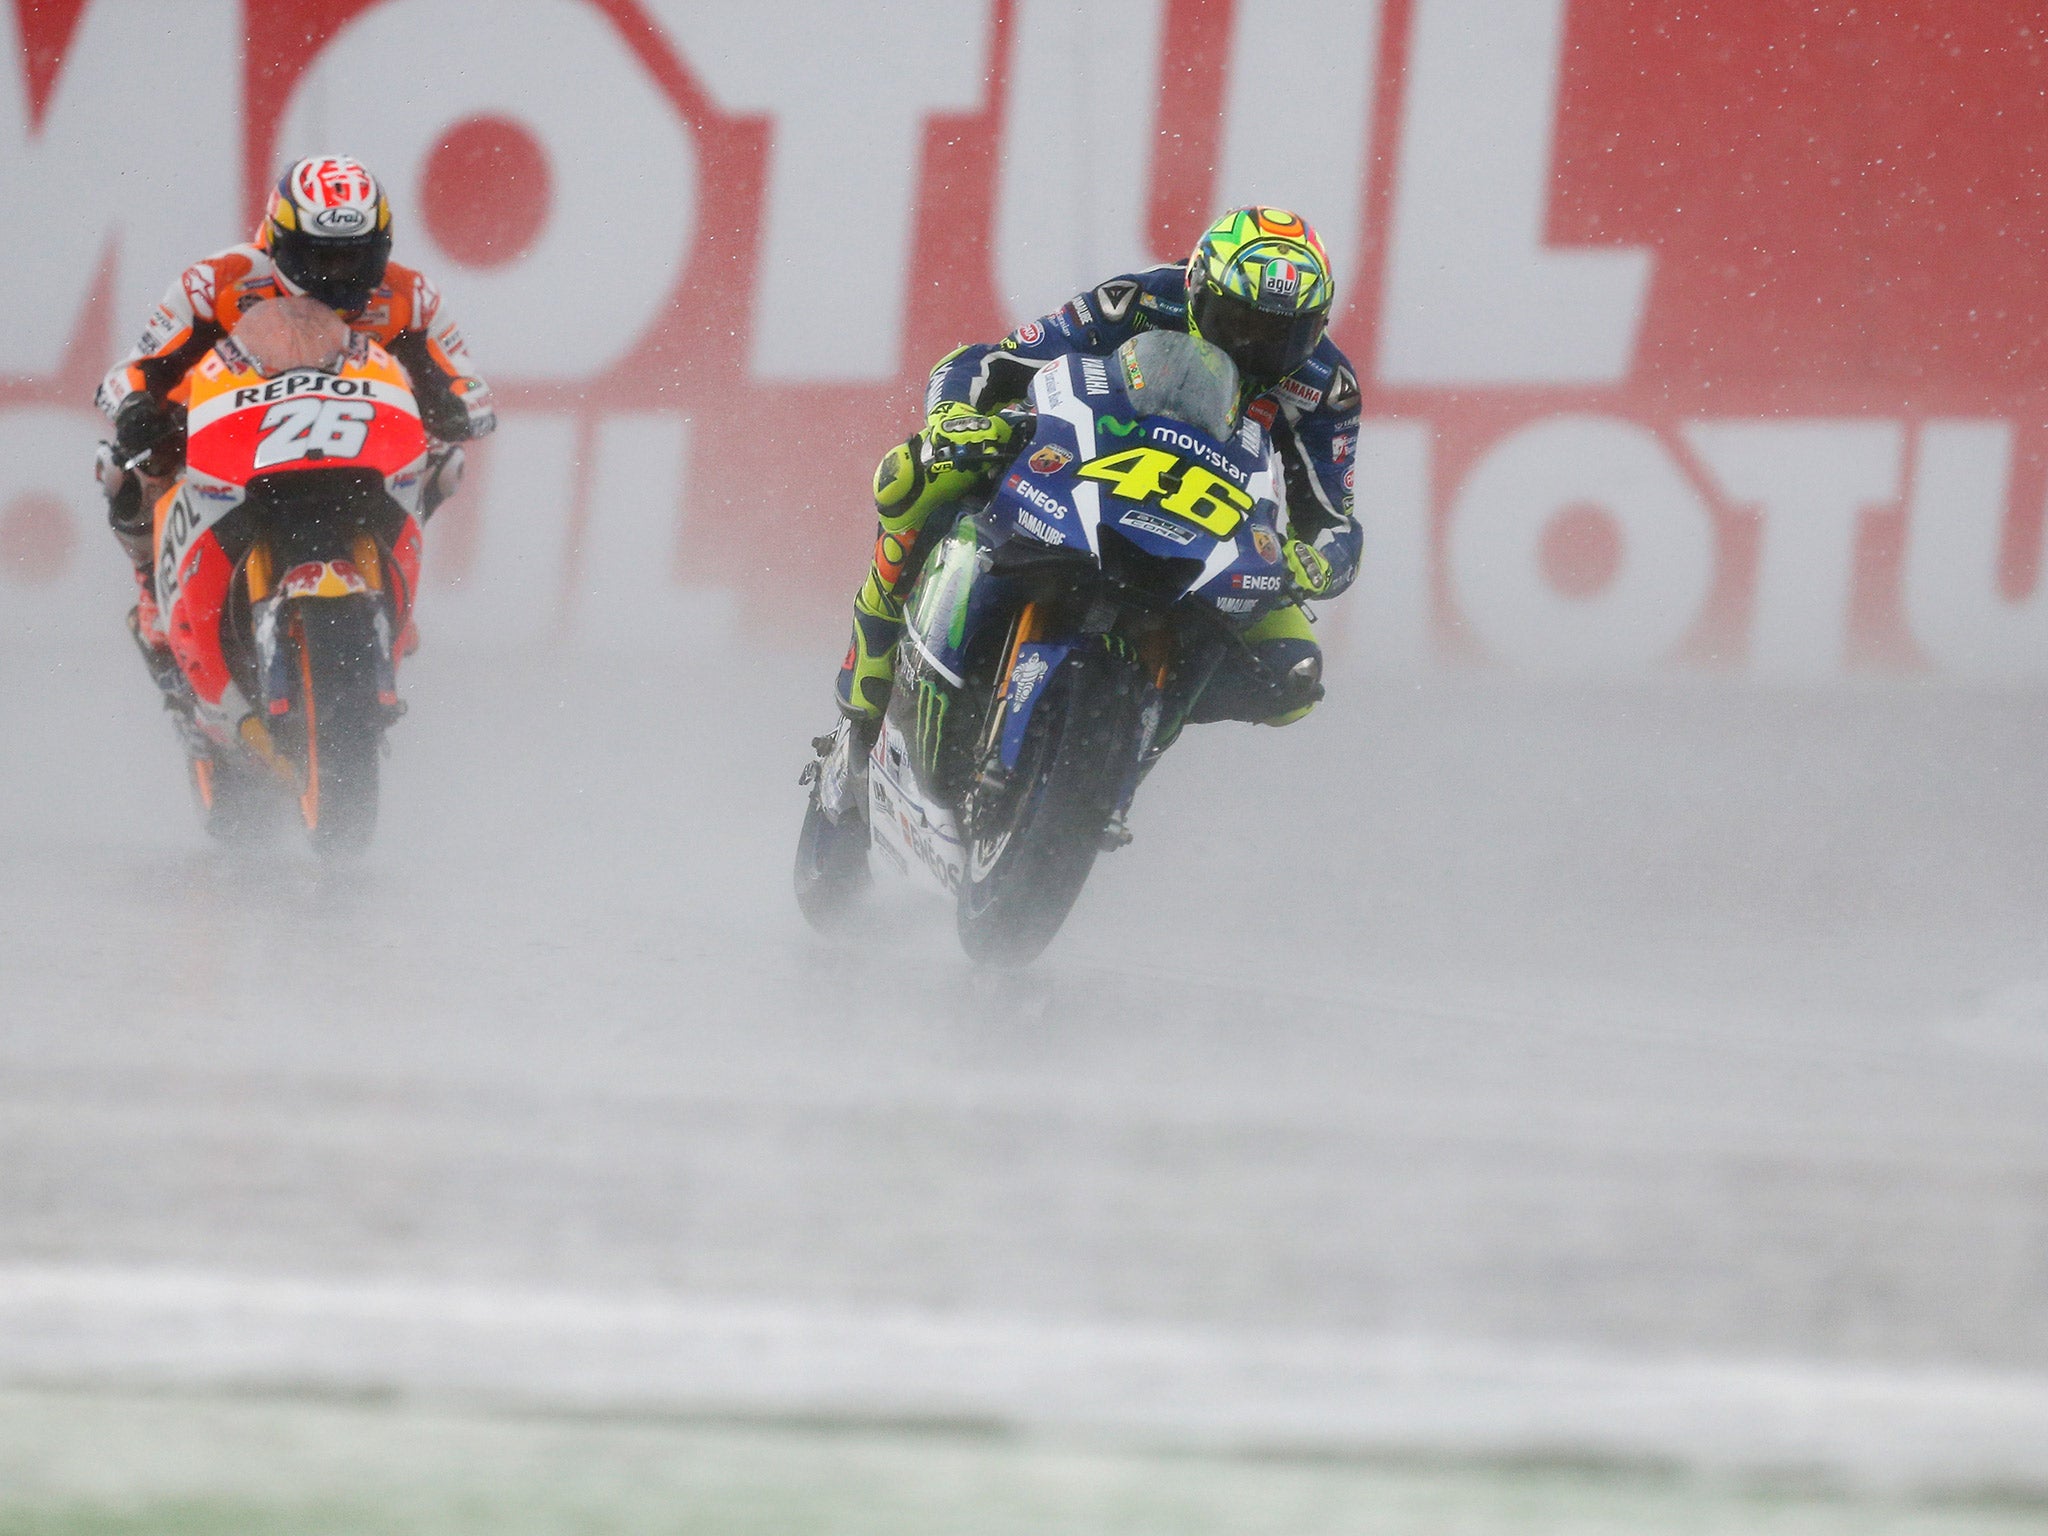 Valentino Rossi crashed out of the race while leading